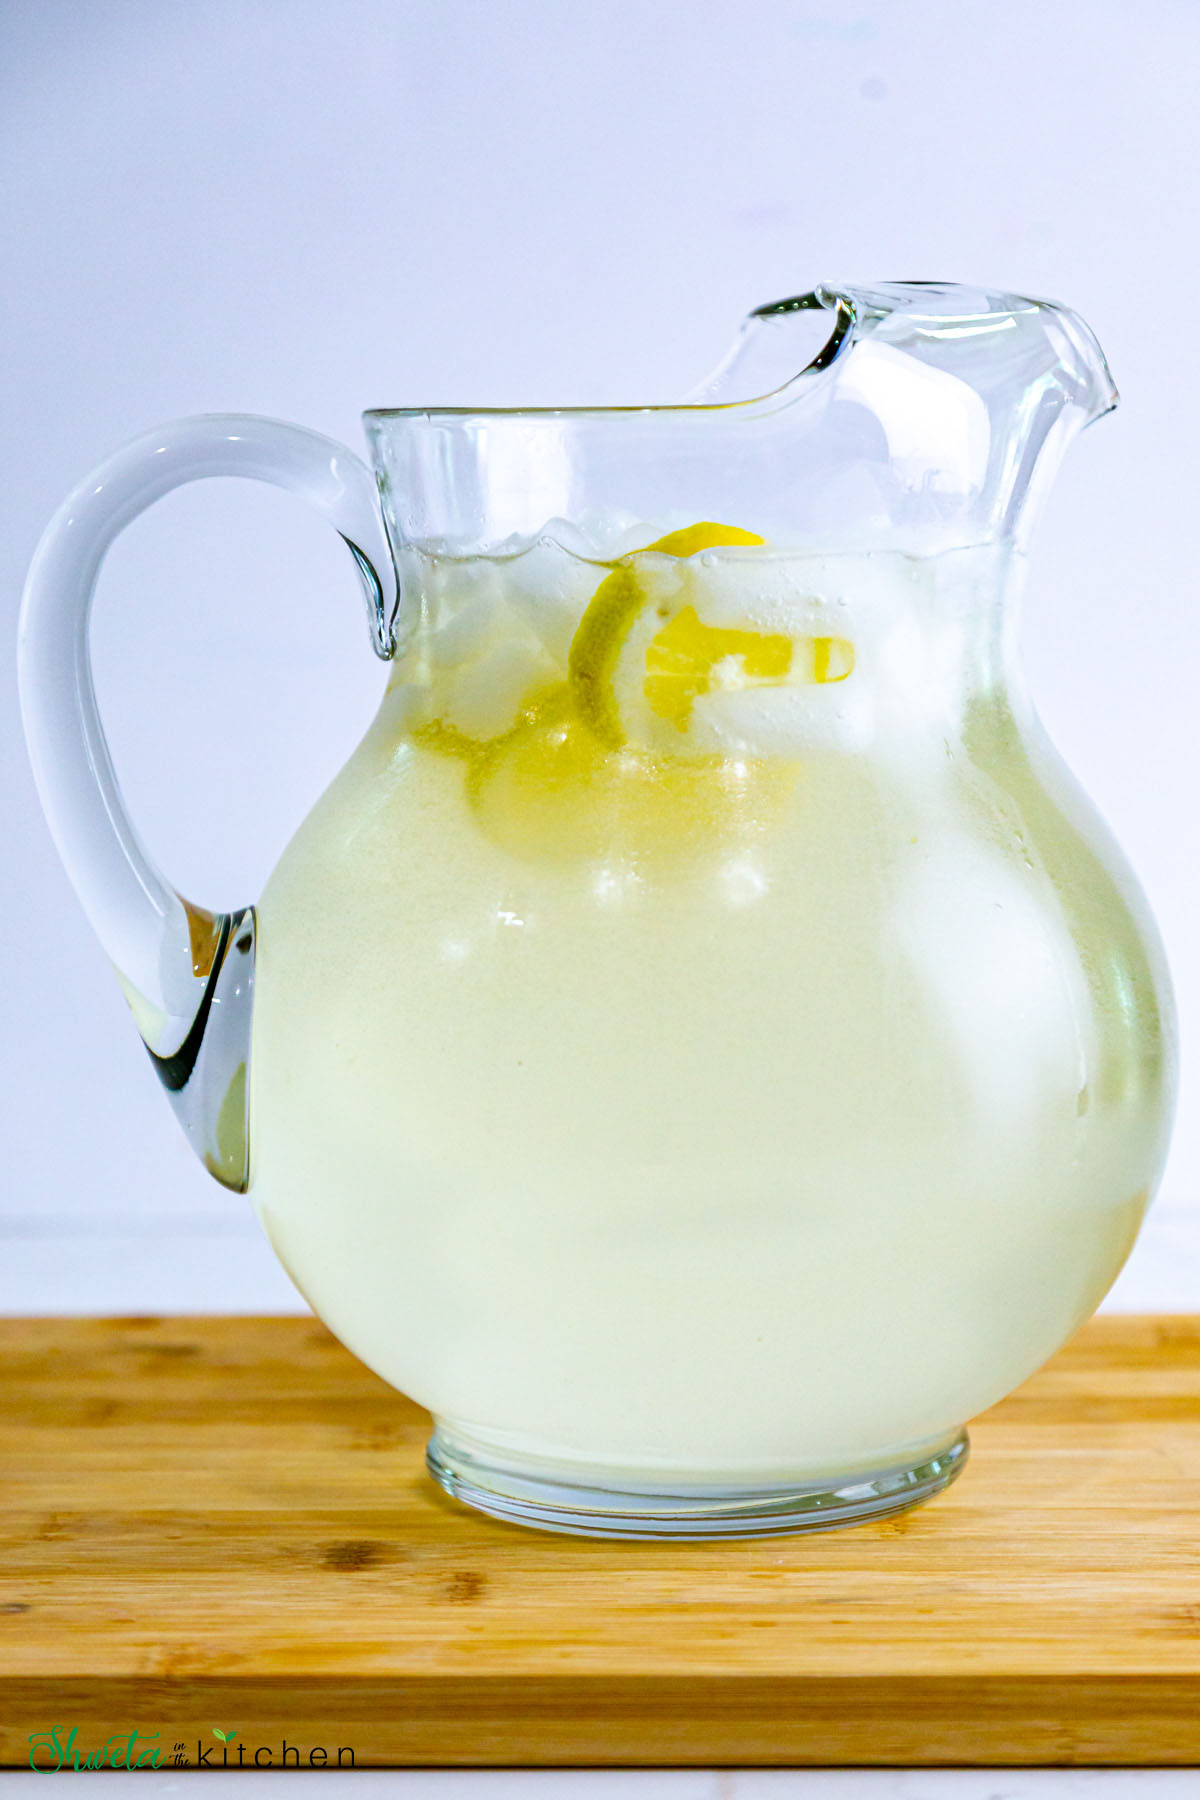 Pitcher of fresh squeezed lemonade with ice and lemon slices